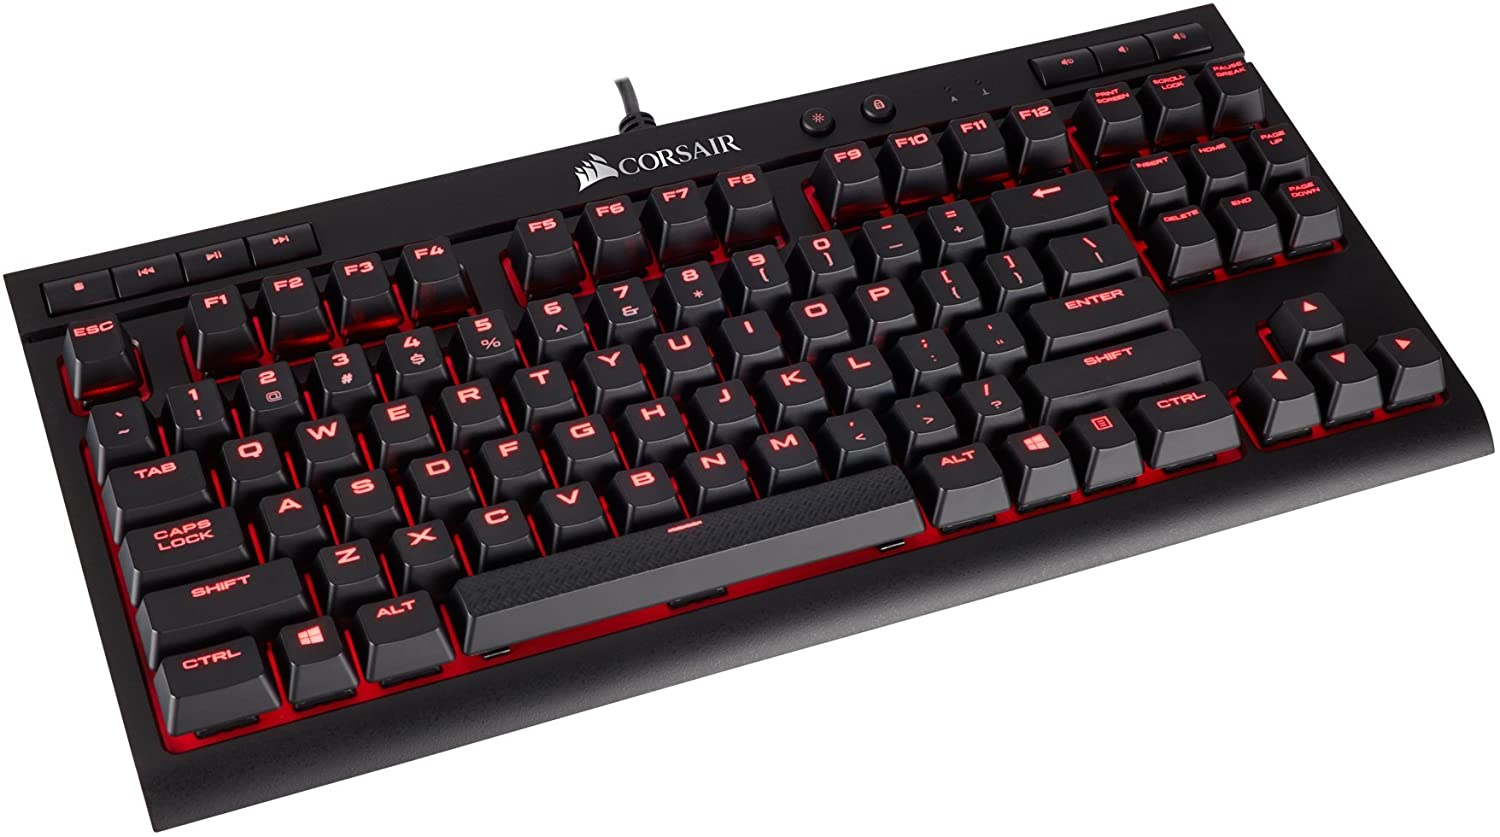 Corsair K63 Compact Mechanical Gaming Keyboard - Backlit Red LED - Cherry MX Red - $59.99 + FS